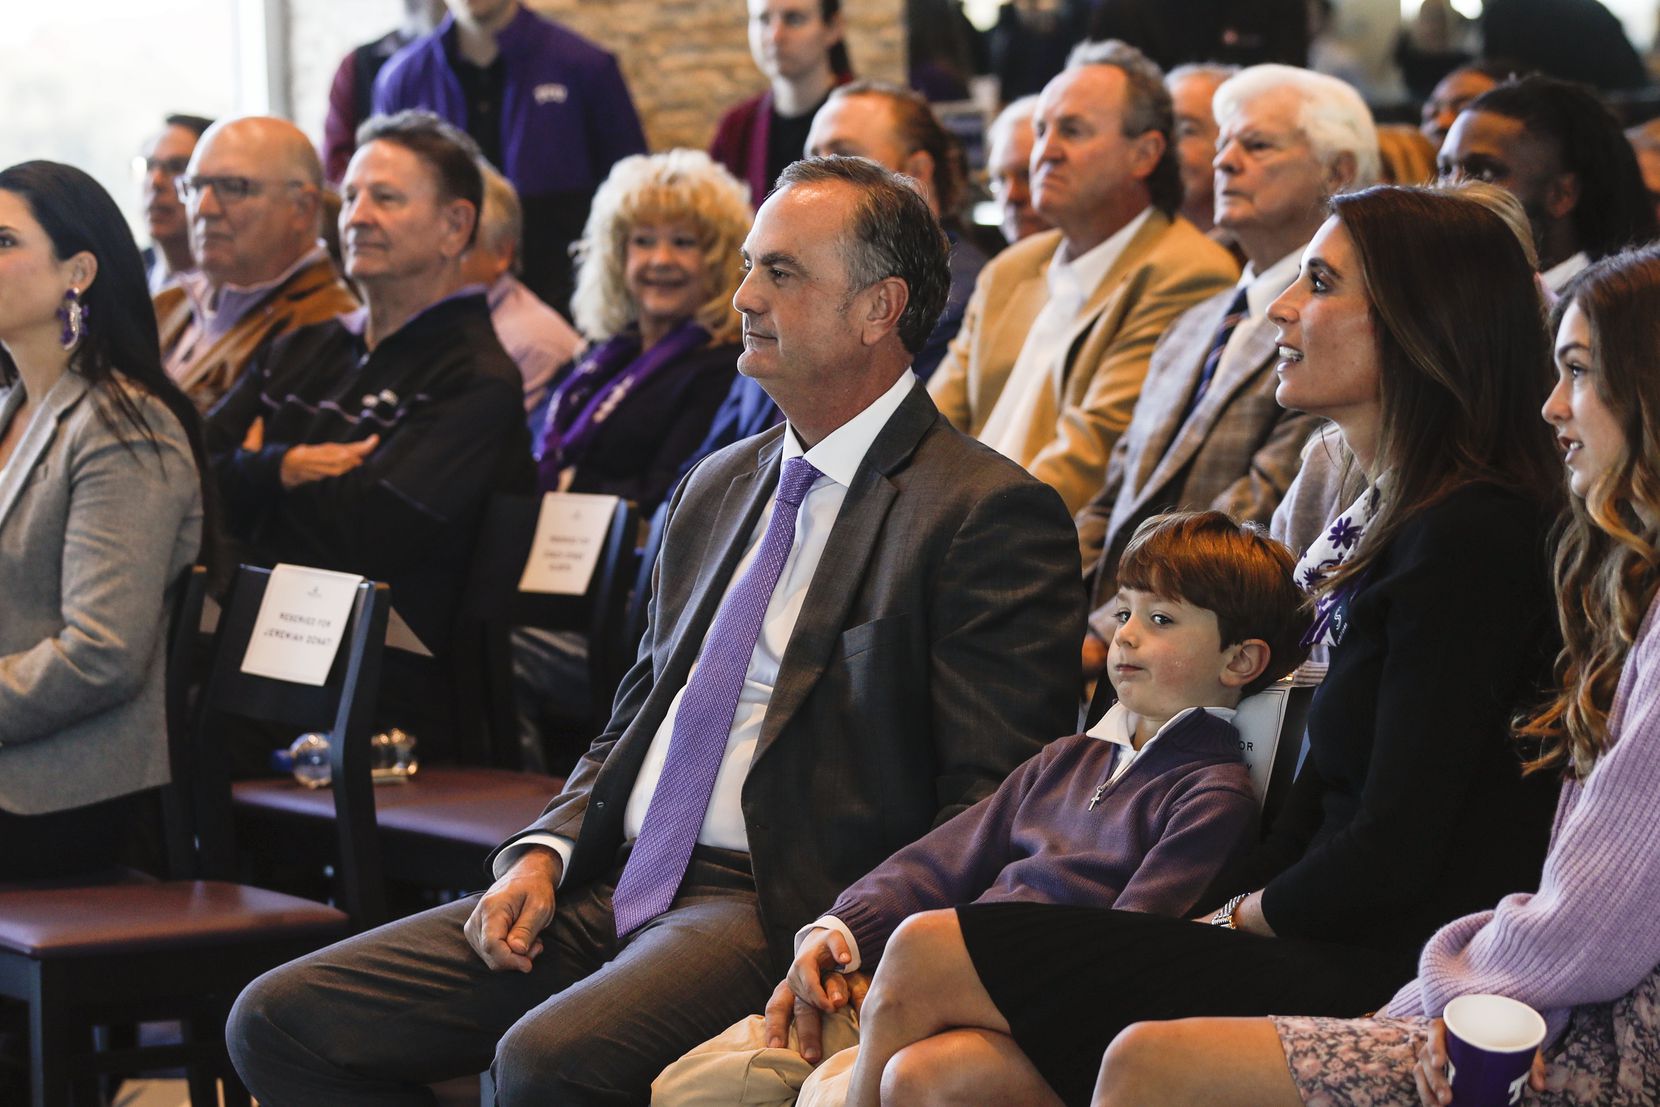 Texas Christian University's head football coach, Sonny Dykes, speaks at a news conference for the first time at Amon G. Carter Stadium in Fort Worth on Tuesday, Nov. 30, 2021. Dykes was formerly introduced as the new head coach of Texas Christian University's football team during the news conference.